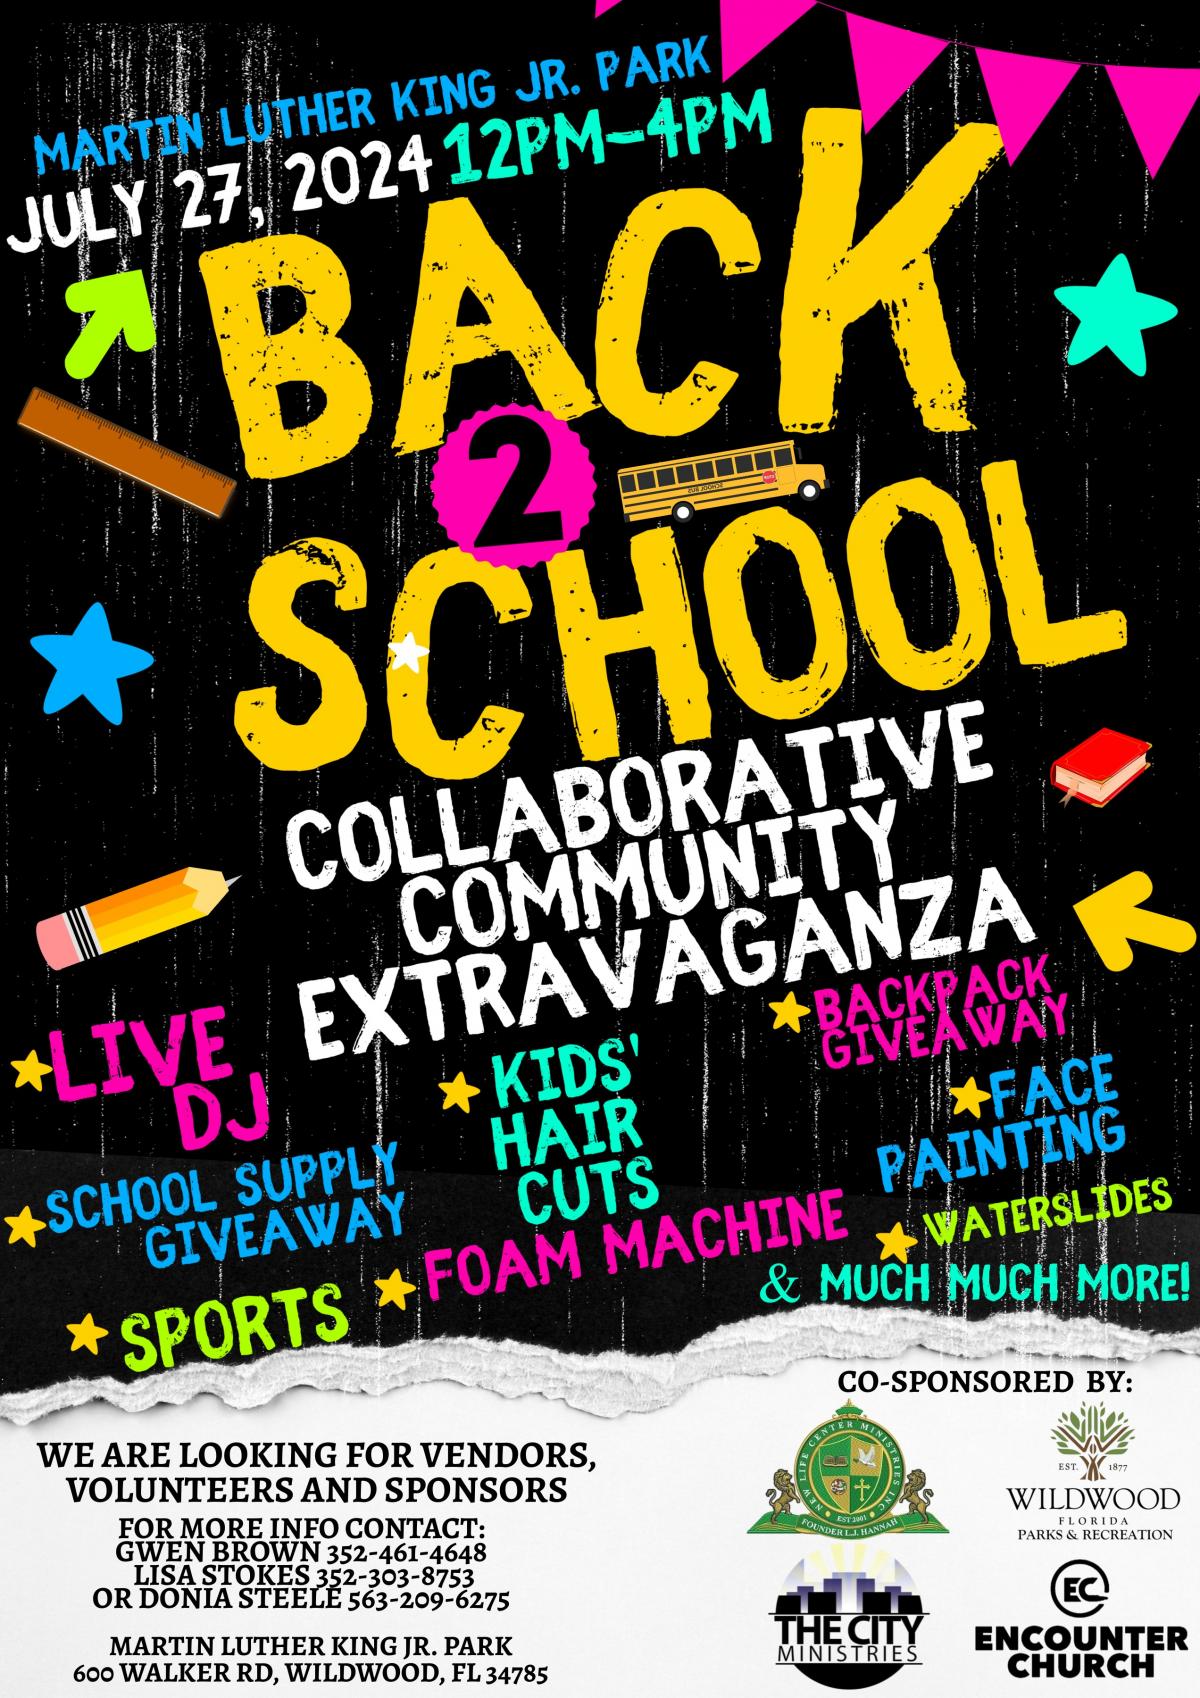 Back To School Collaborative Community Extravaganza, Saturday, July 27, 2024, Martin Luther King Jr. Park,12:00 -4:00 p.m.